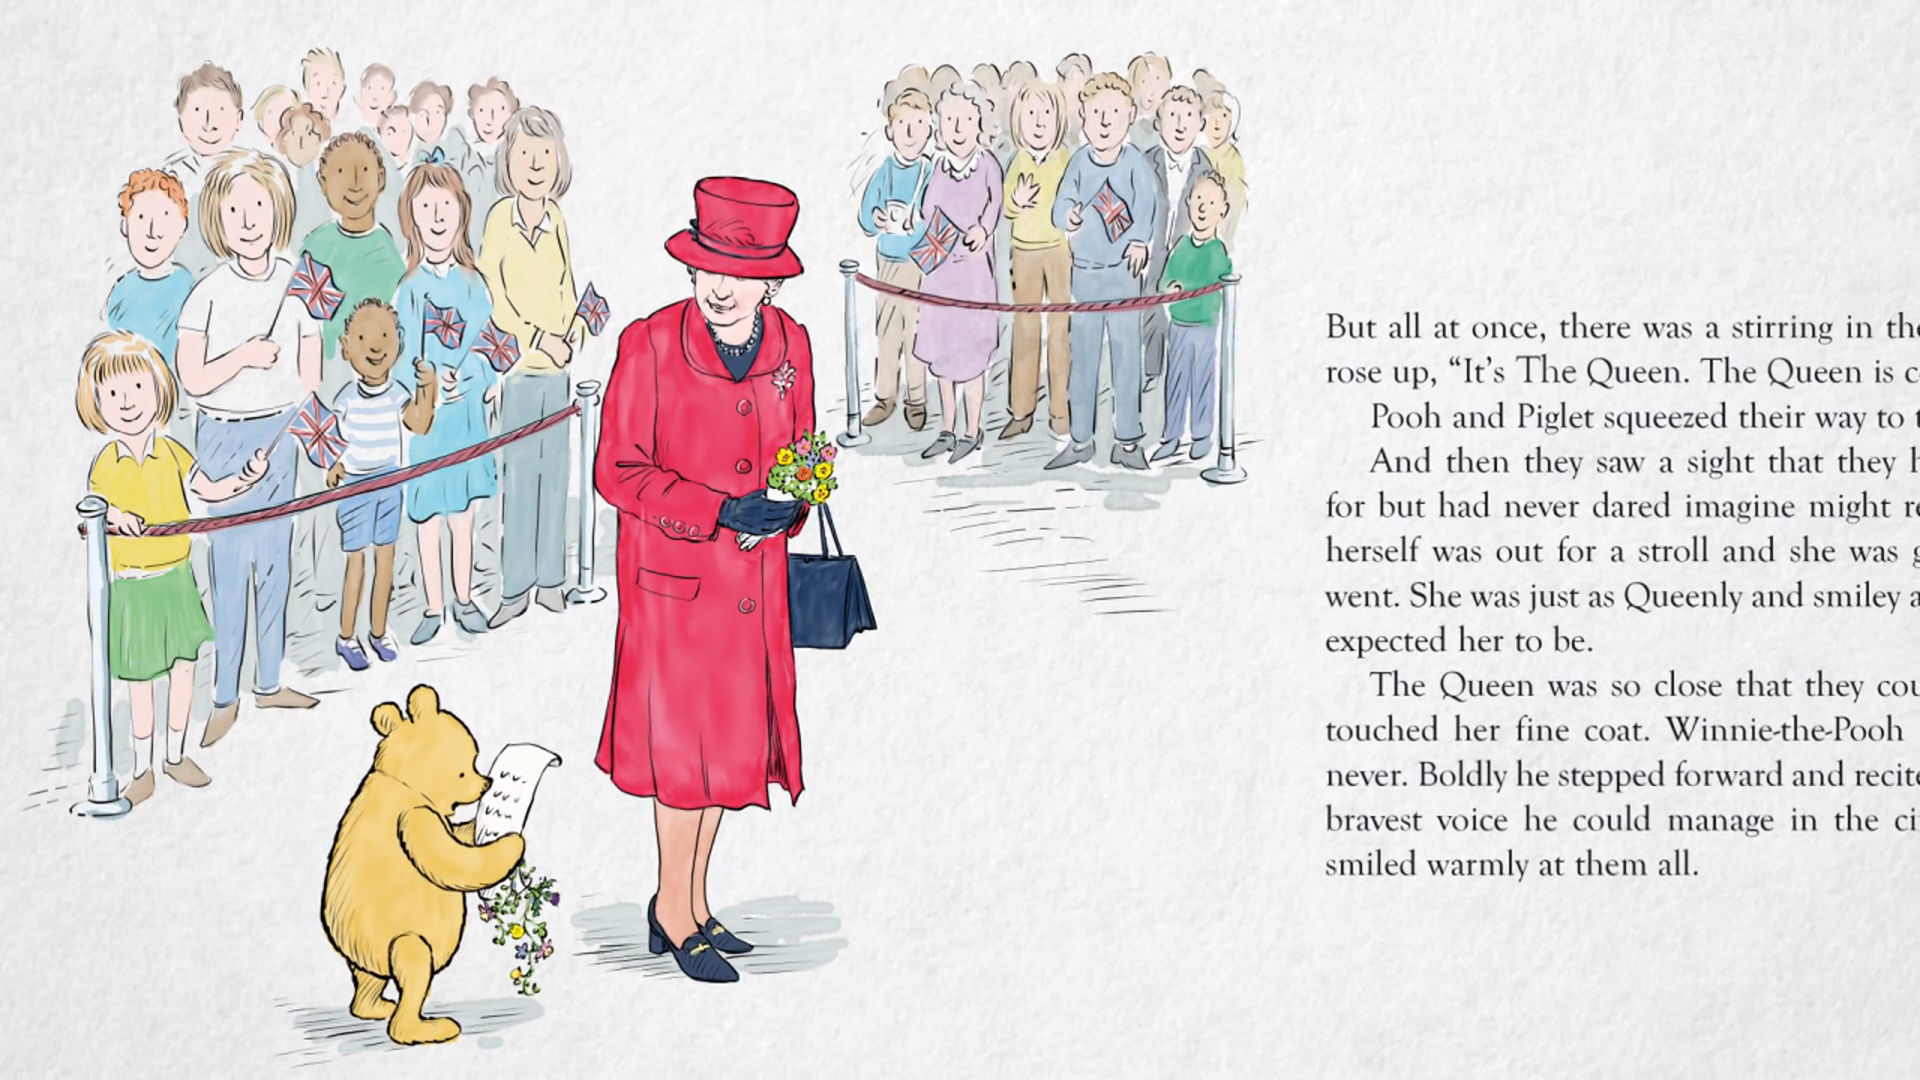 Winnie the Pooh and the Royal Birthday